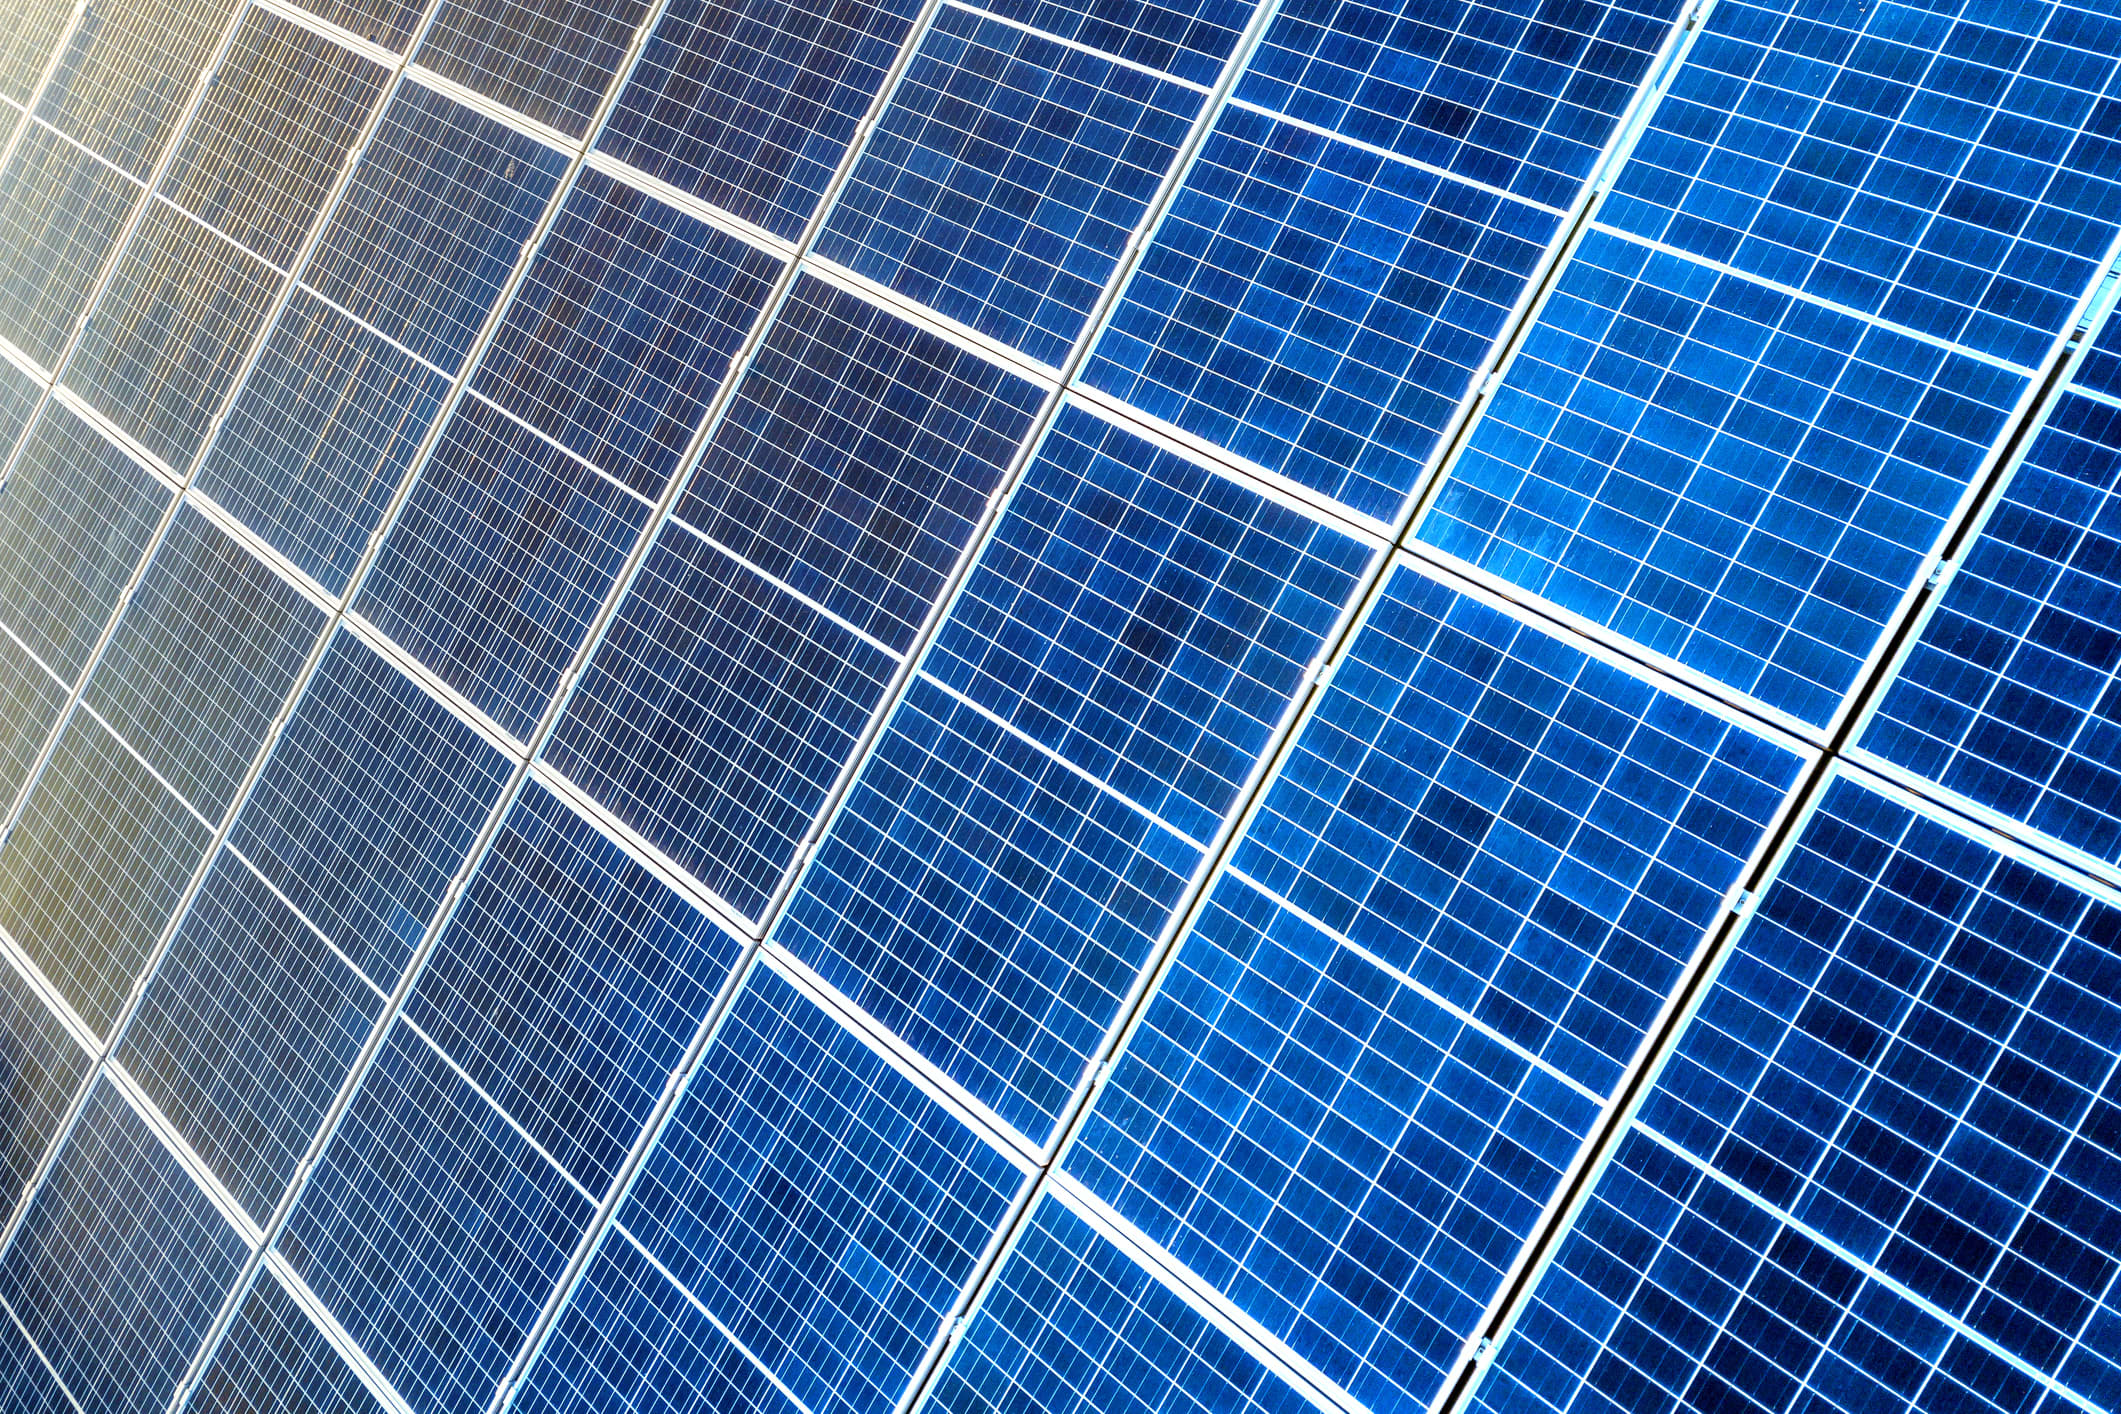 The US solar industry recorded record growth in 2020, despite Covid-19, a new report concluded